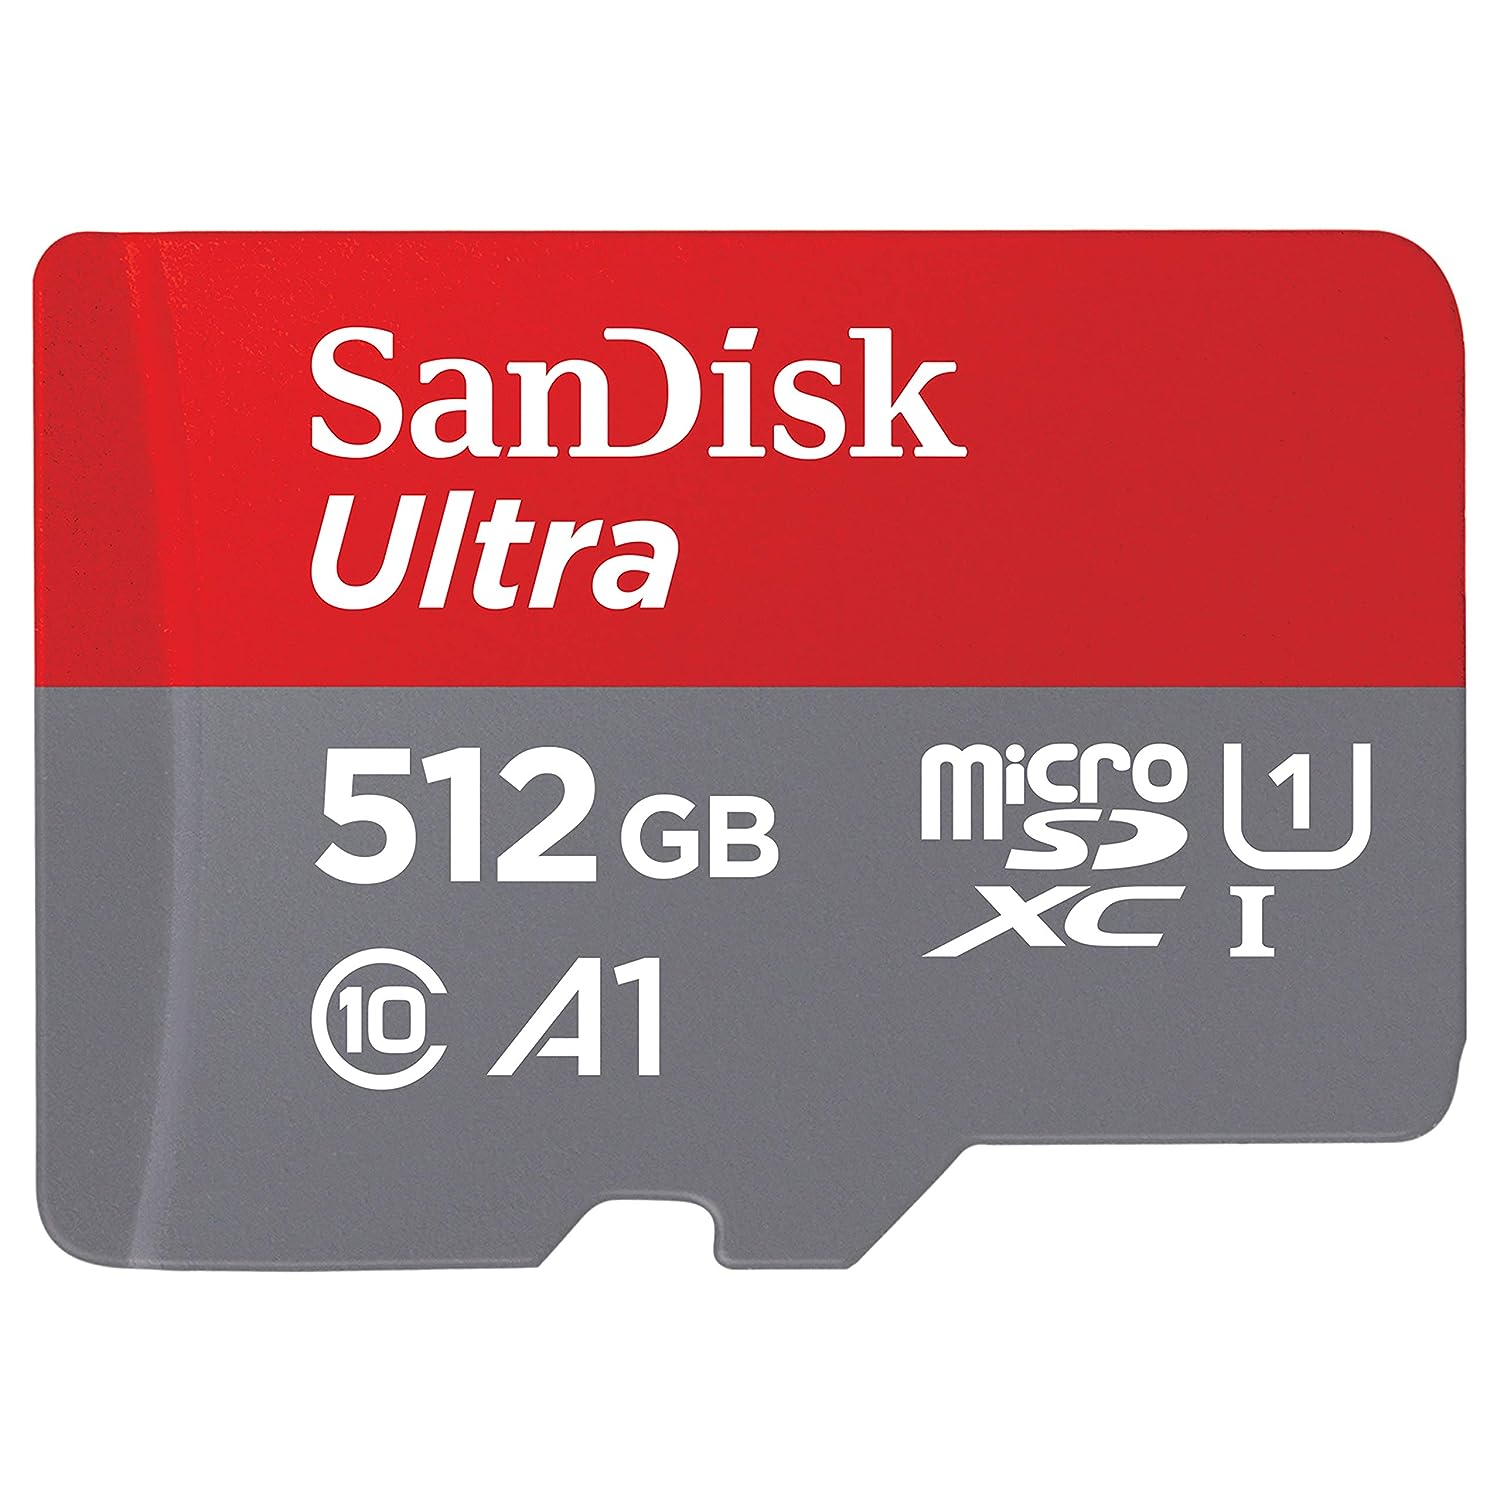 Sandisk ULTRA SD Class 10 Card - 150 MBPS 512GB